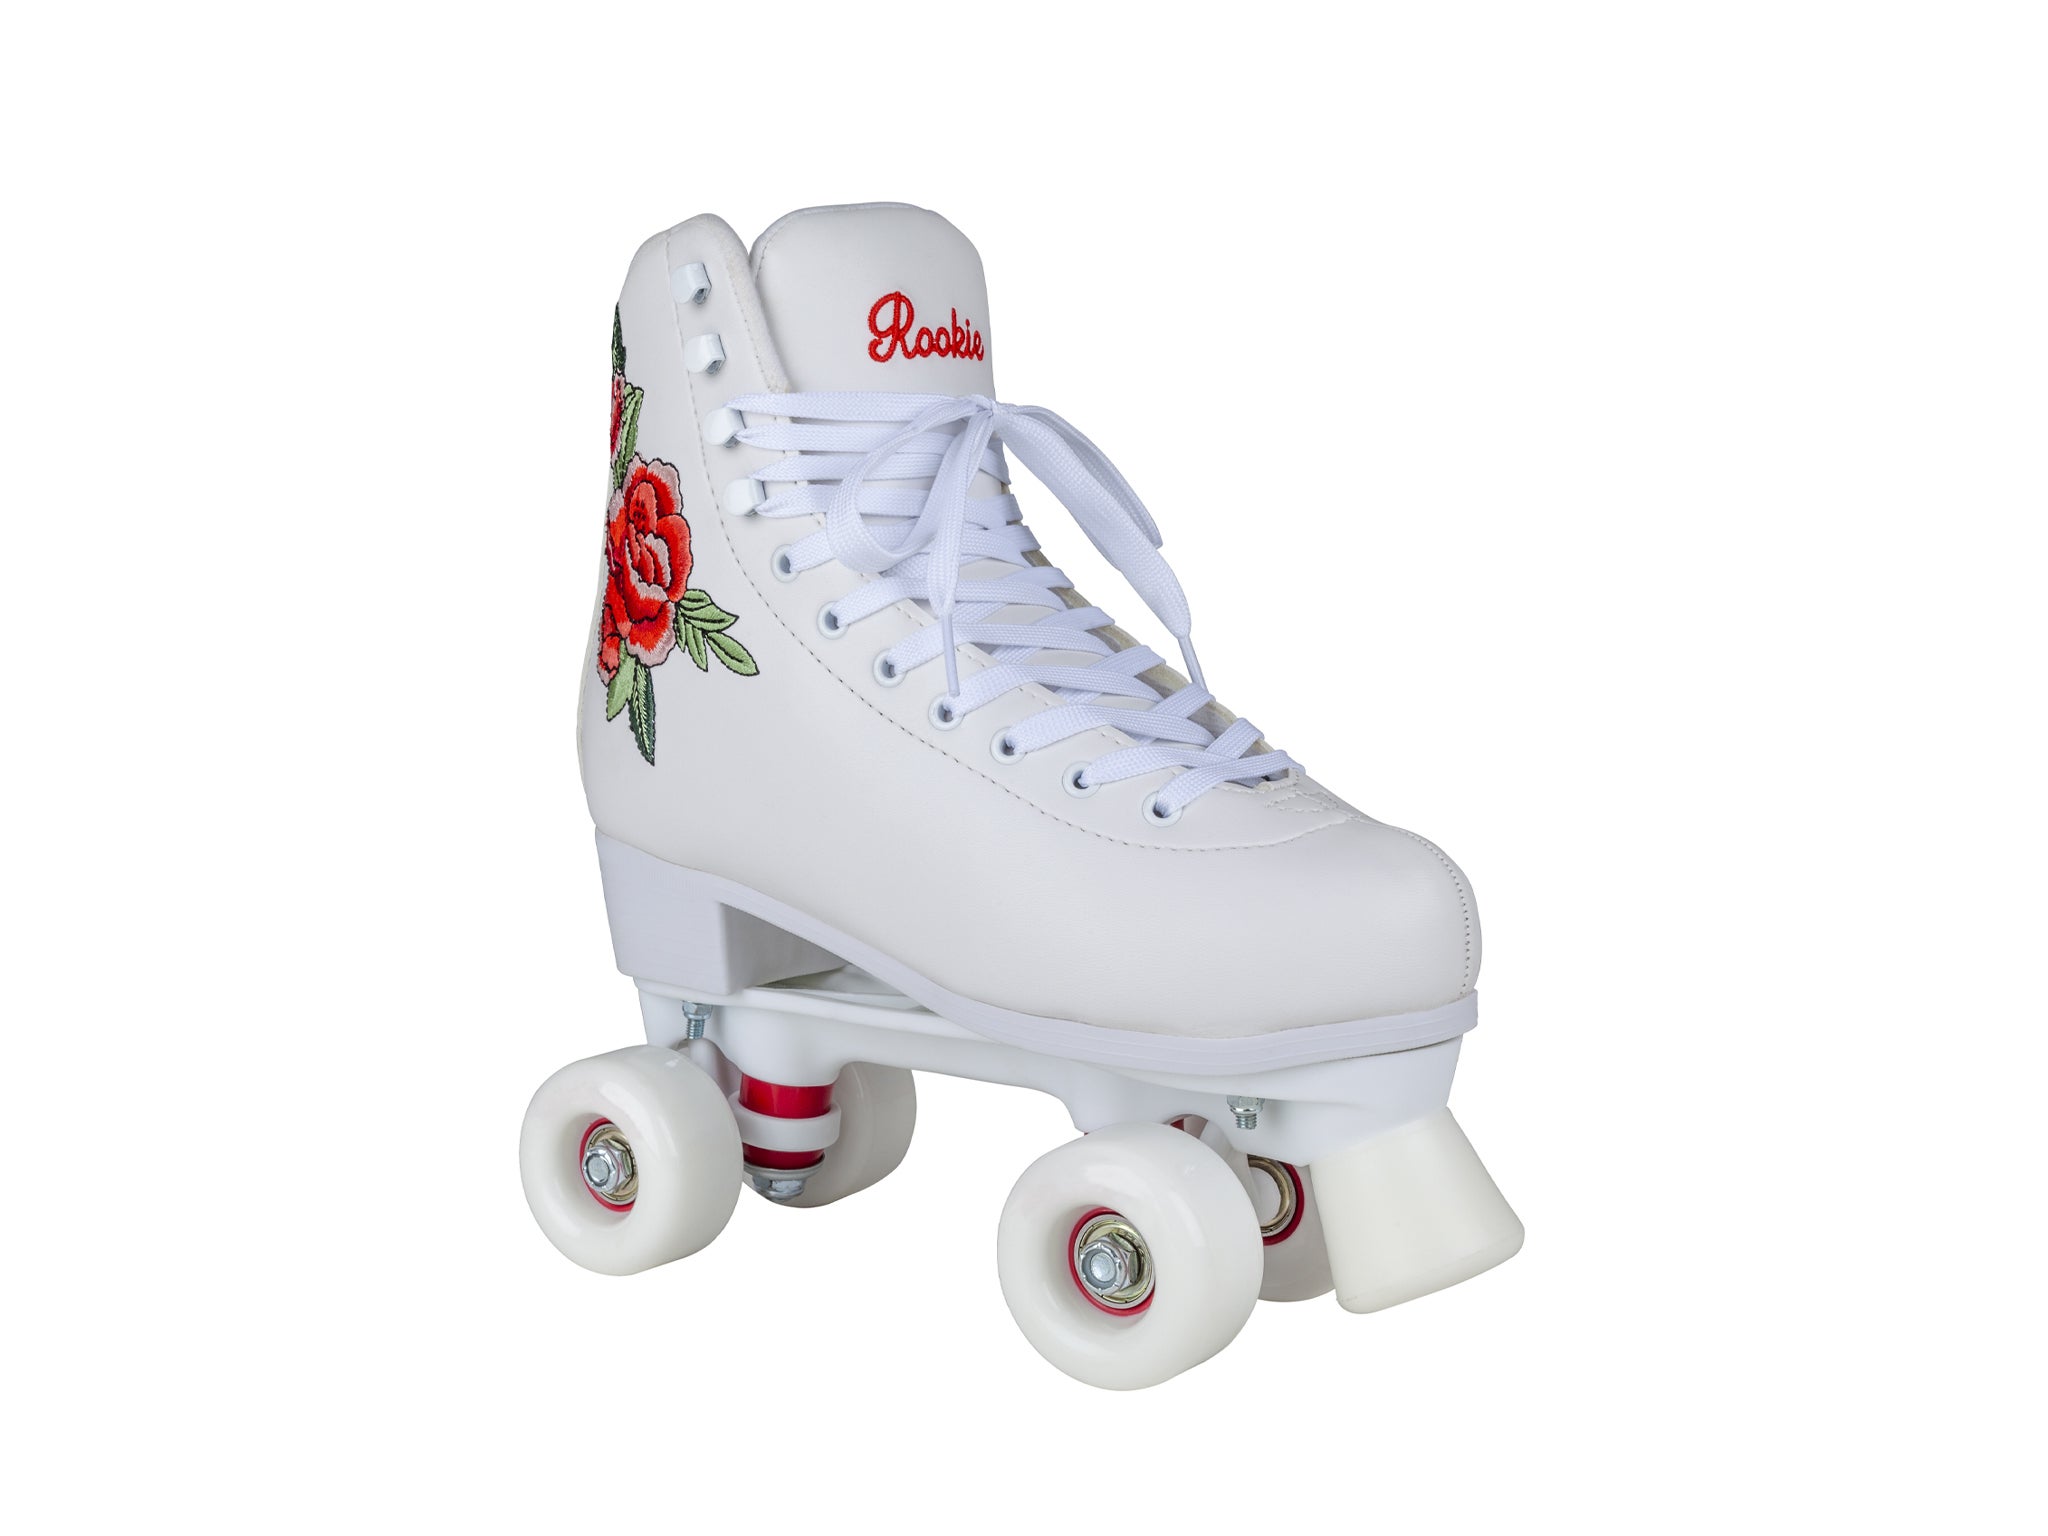 Men and Women Safe and Durable Inline Roller Skates for Girls and Boys Otw-Cool Adjustable Inline Skates for Kids and Adults Outdoor Blades Roller Skates with Full Light Up LED Wheels 